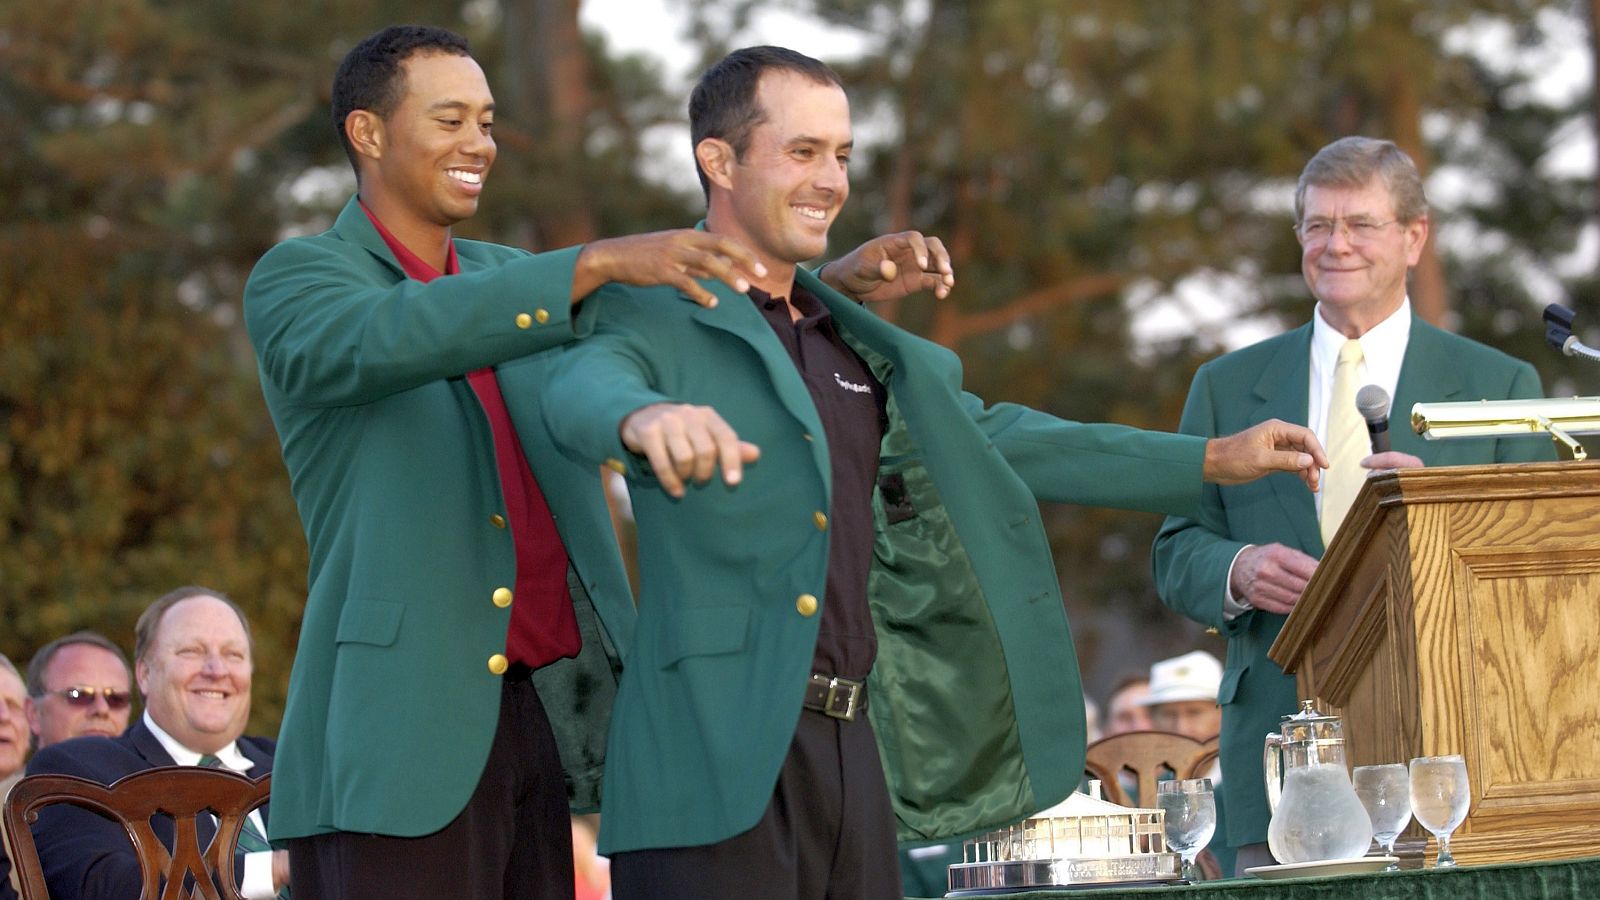 The Masters 2003: Mike Weir / CAN © golfsupport.nl